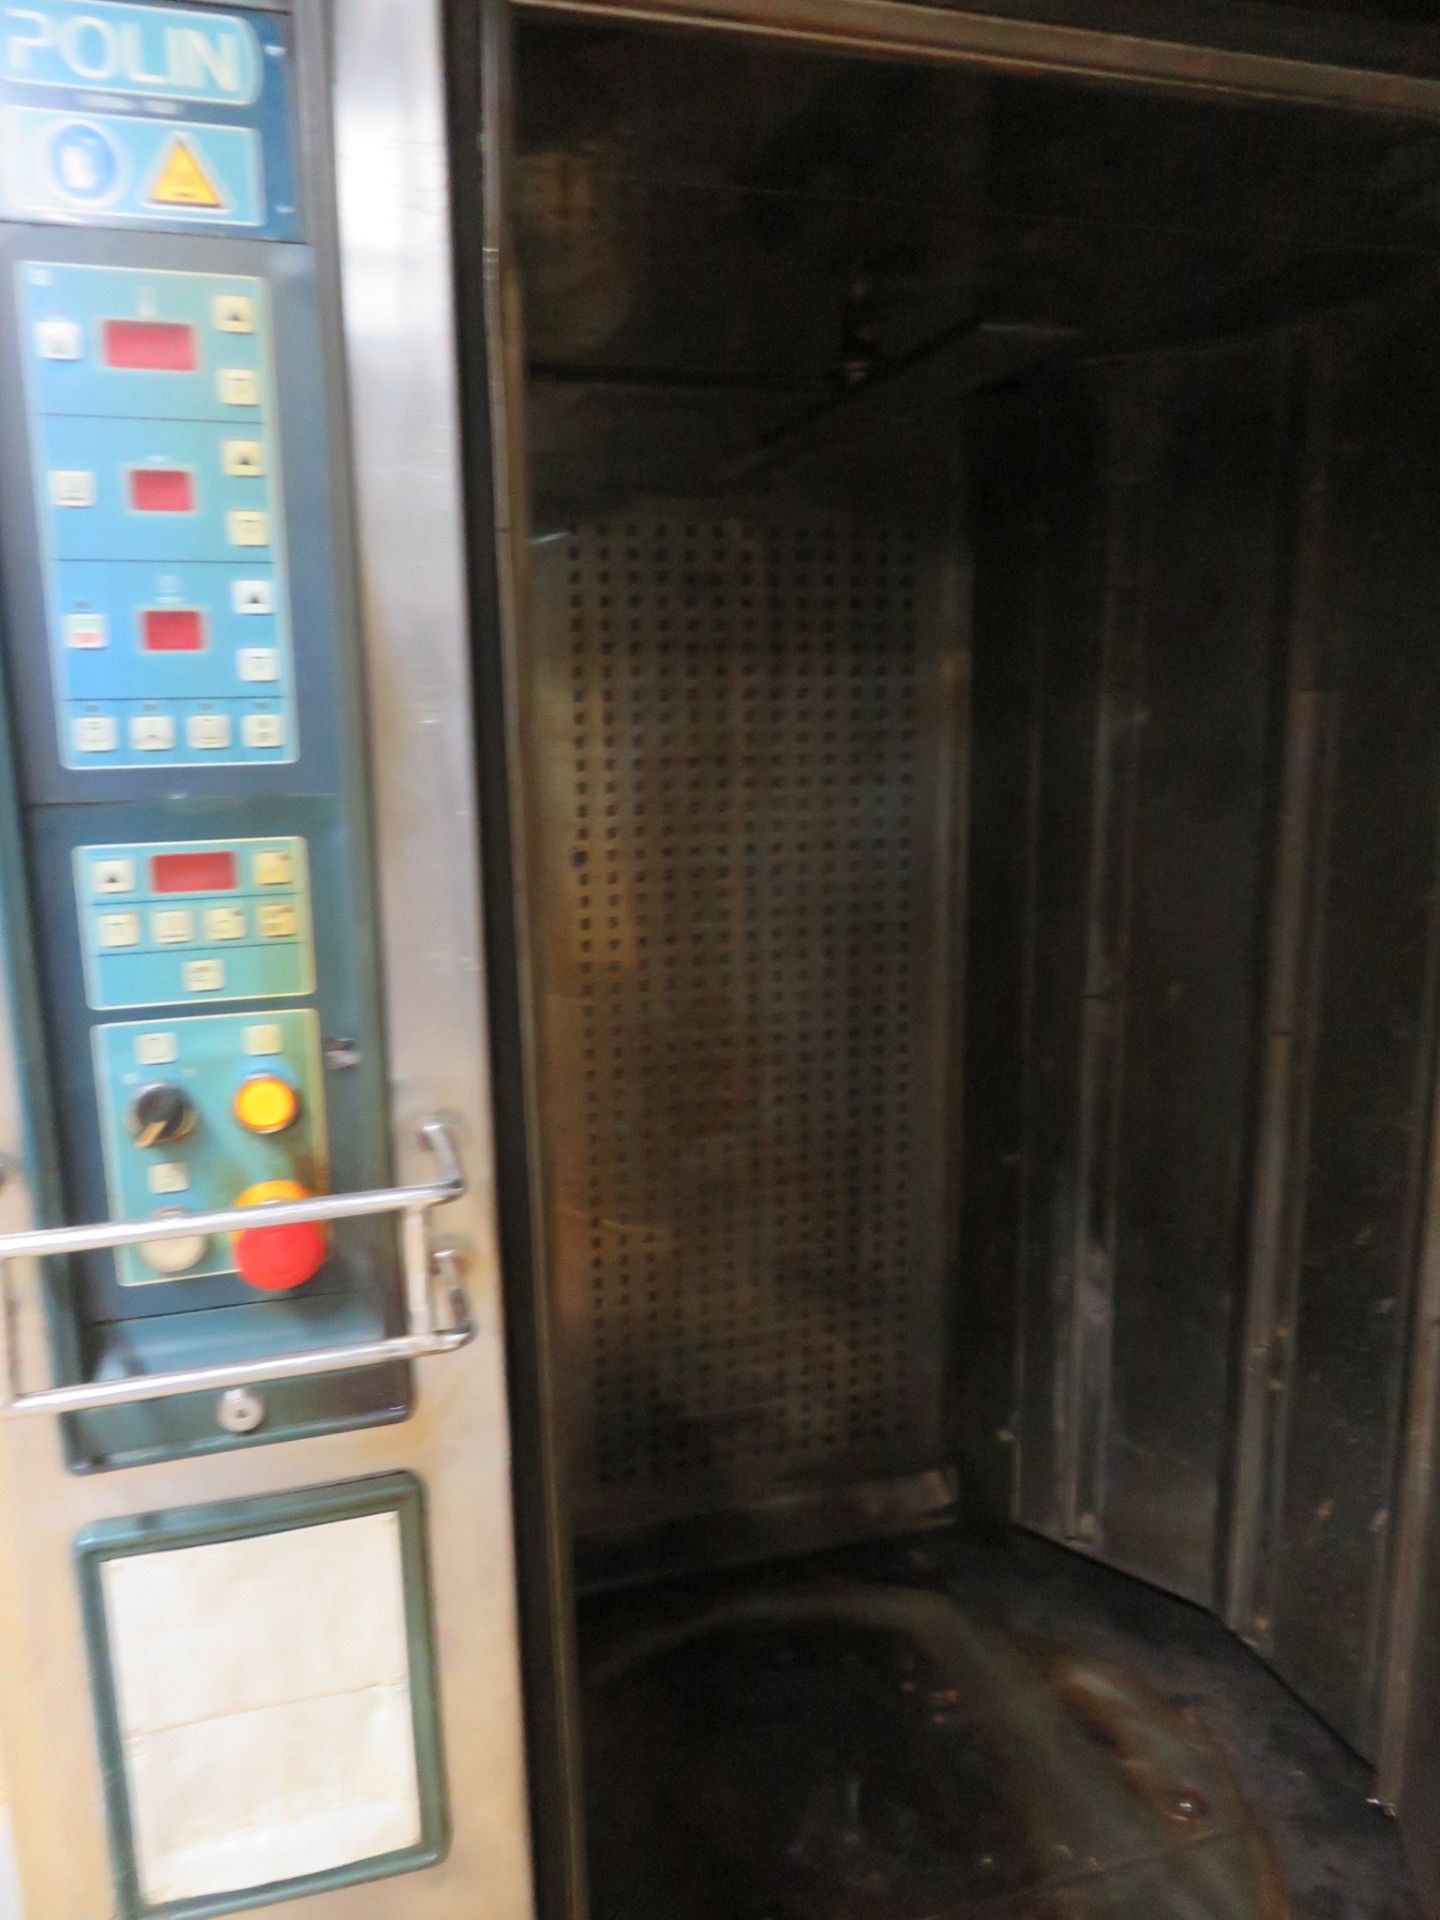 Polin S/s gas fired Oven. Takes 1 x double Rotary Rack Type B23 . Lift Out £320 - Image 3 of 3